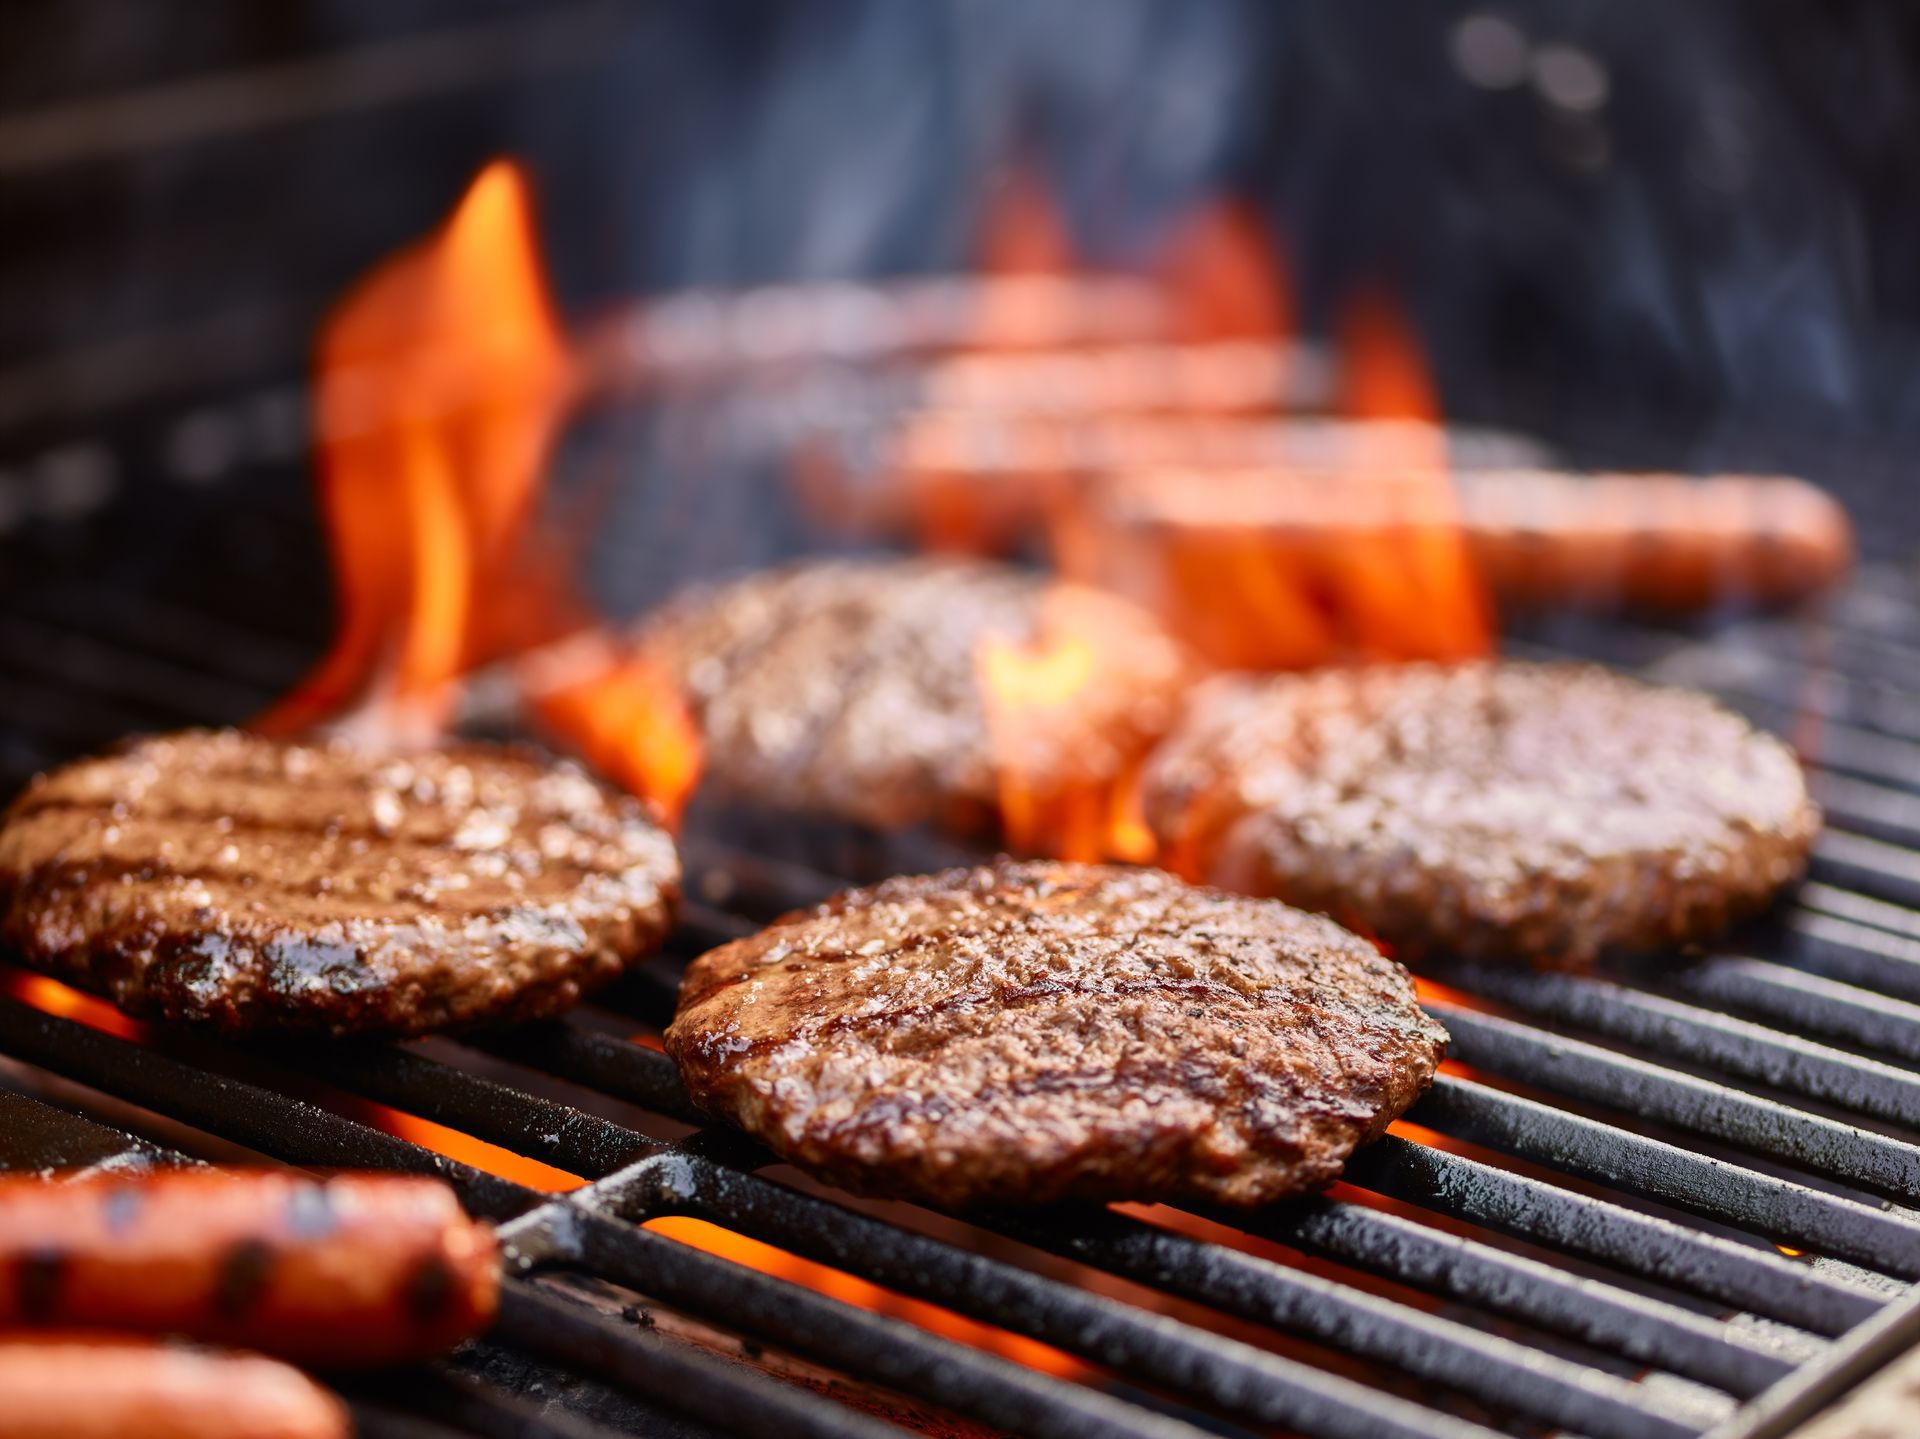 hamburgers and hot dogs are cooking on a grill.